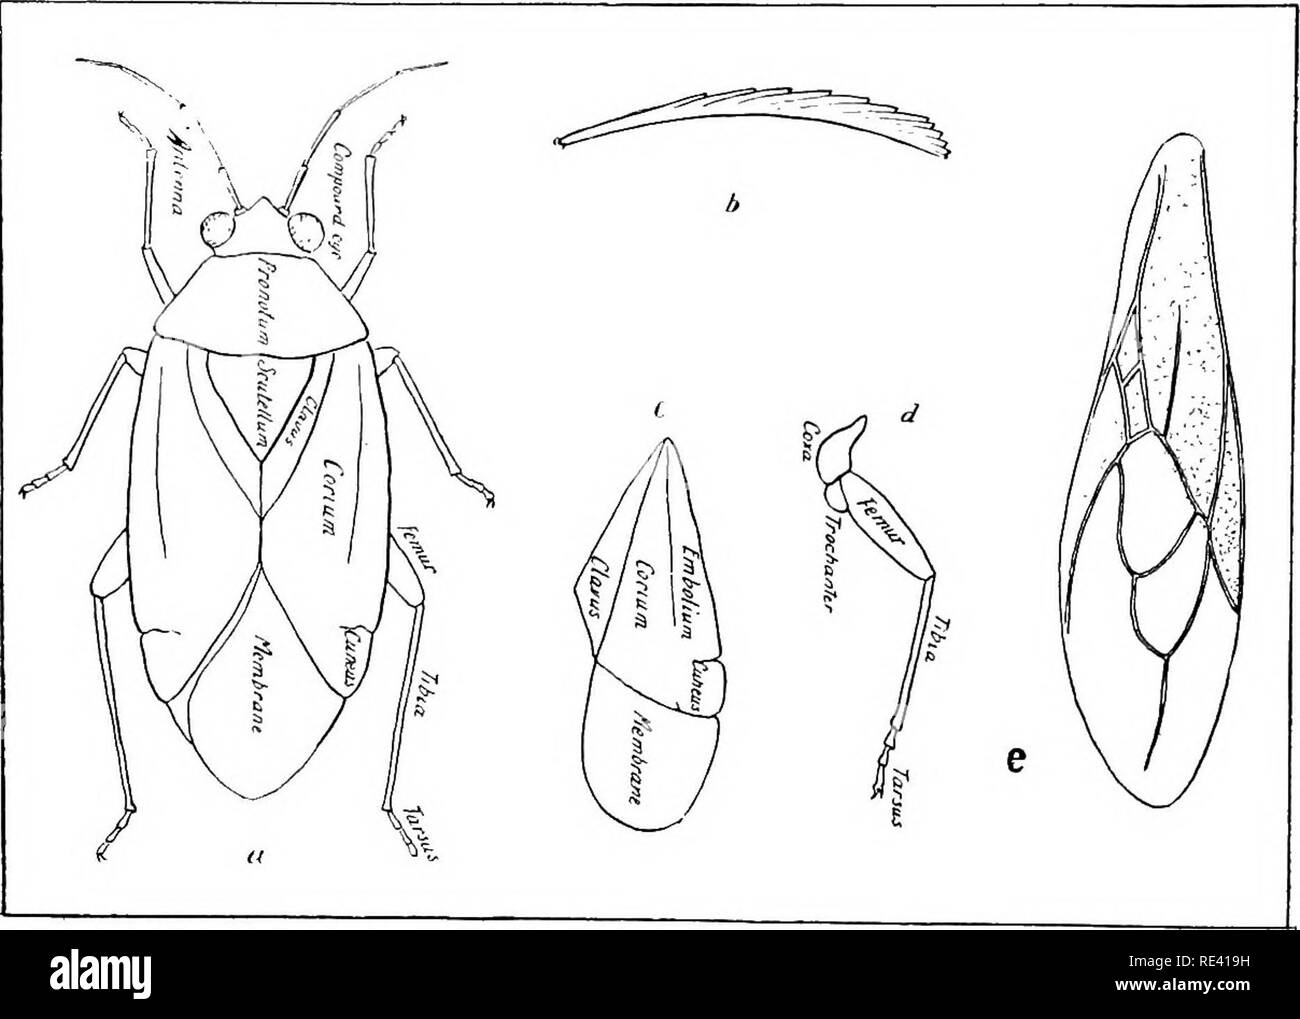 . Handbook of medical entomology. Insect pests; Insects as carriers of disease; Medical parasitology. 276 Hominoxious Arthropods dd. Eyes indistinct or wanting; pharynx long and slender, fulturae very slender and closely applied to the pharynx; proboscis very long. Several genera found upon various mammals H^matopinid^. cc. Body swollen; meso- and metathorax, and abdominal segments two to eight each with a pair of stigmata; eyes wanting; antenna four or five-segmented; body covered with stout spines. Three genera found upon marine mammals Echinophthiriid^ a. Legs fitted for walking or jumping; Stock Photo